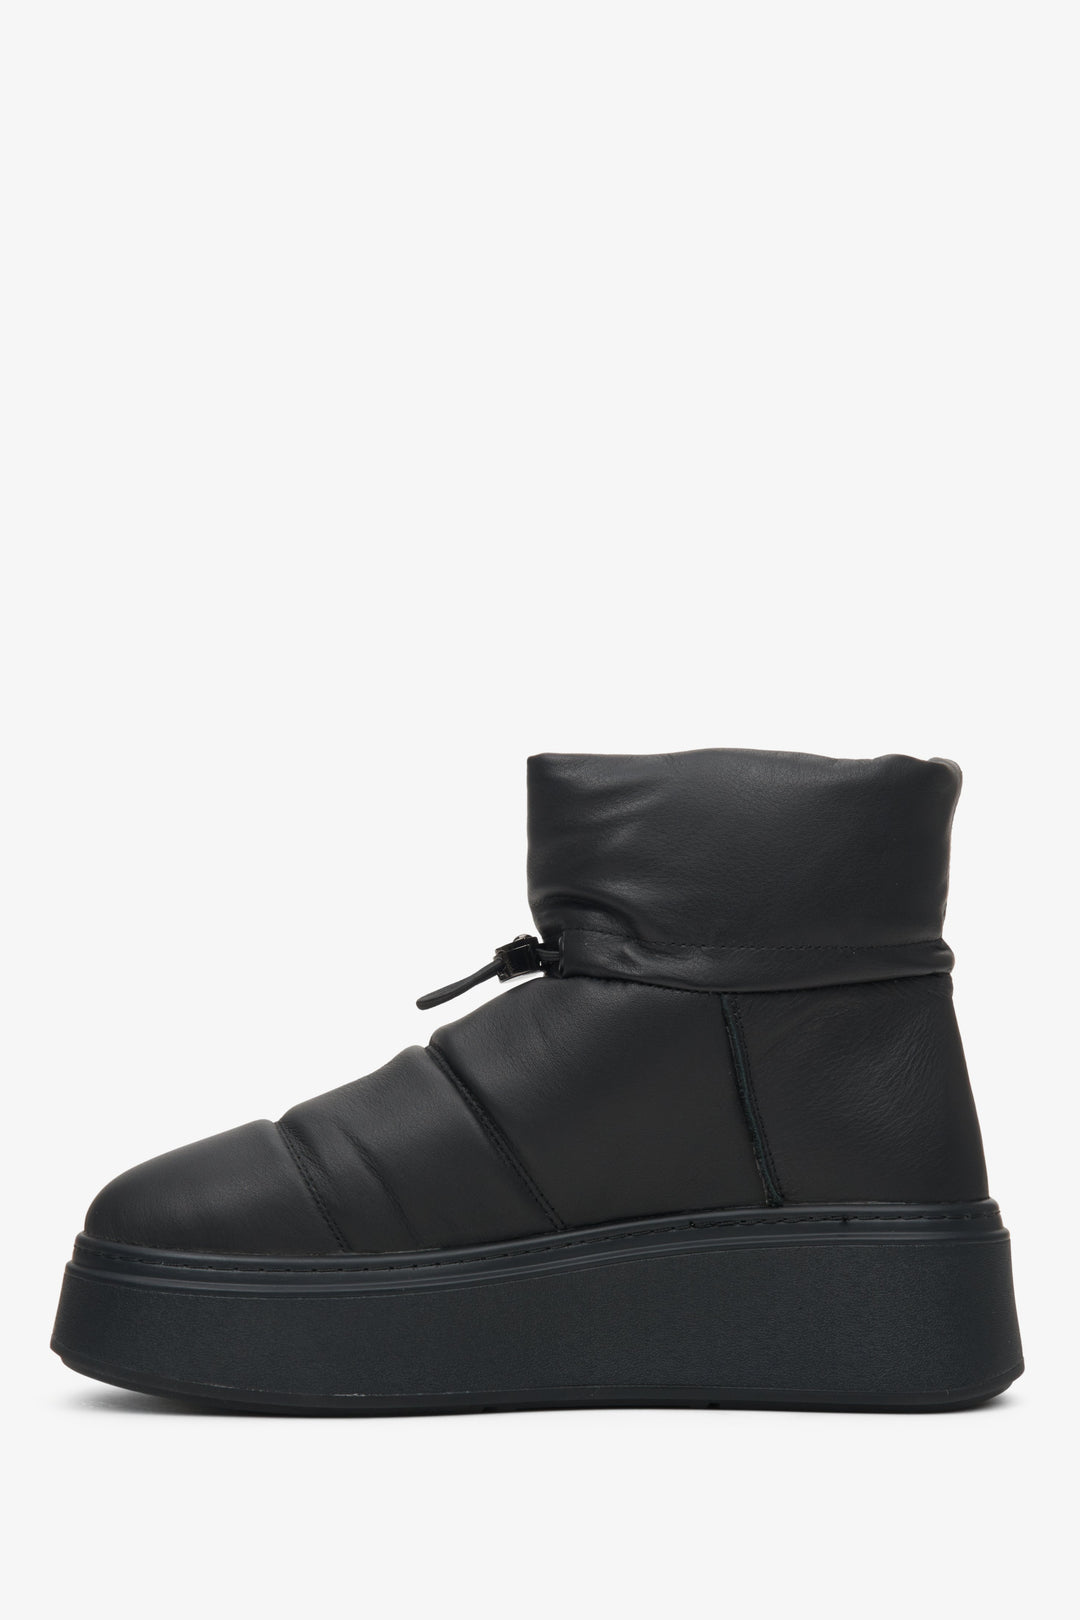 Winter women's snow boots by Estro with a cuff in black color.